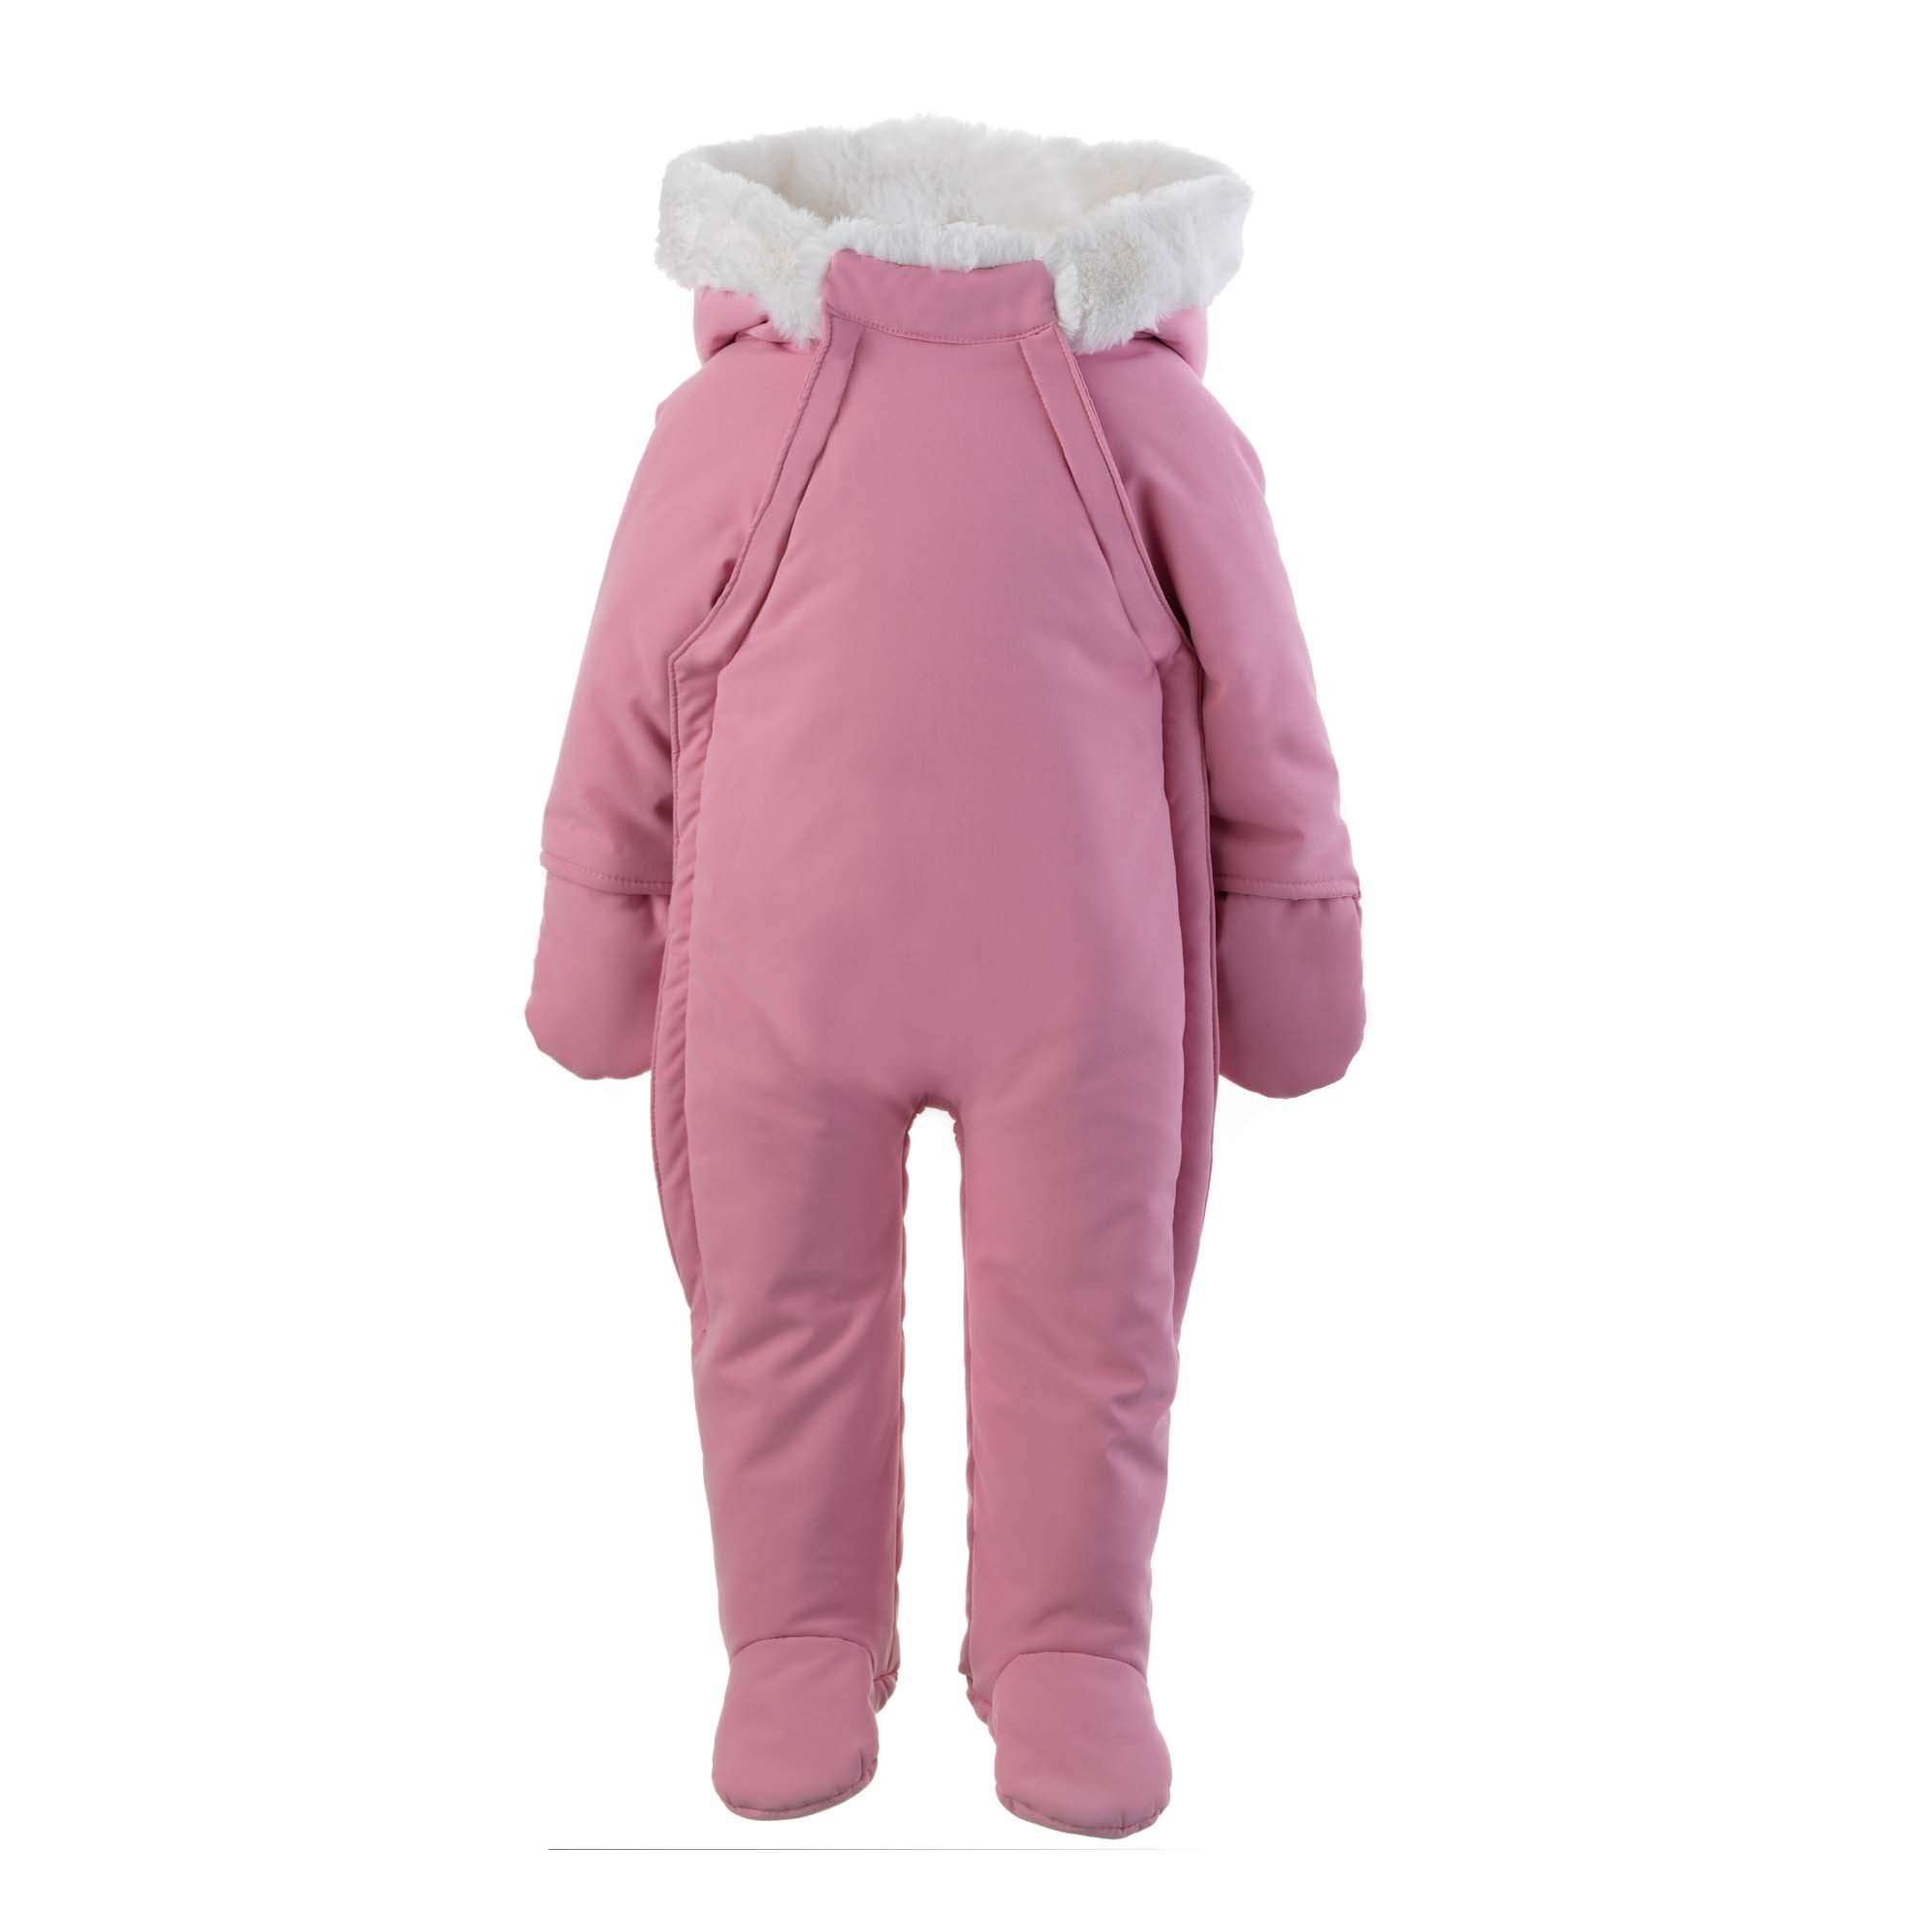 Embroidered Snowsuit Pink